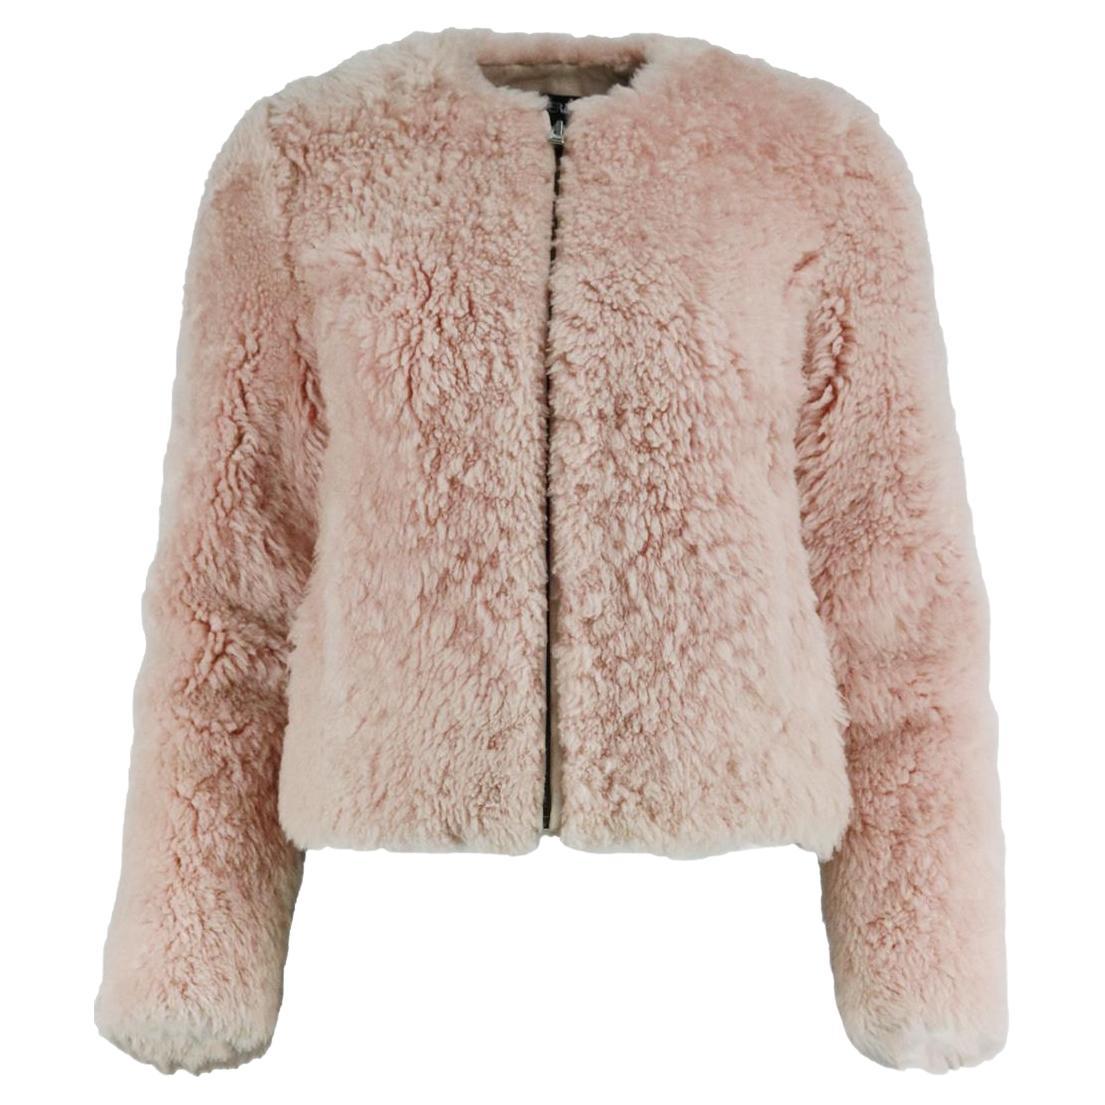 Intermix Suede Trimmed Shearling Jacket Xsmall